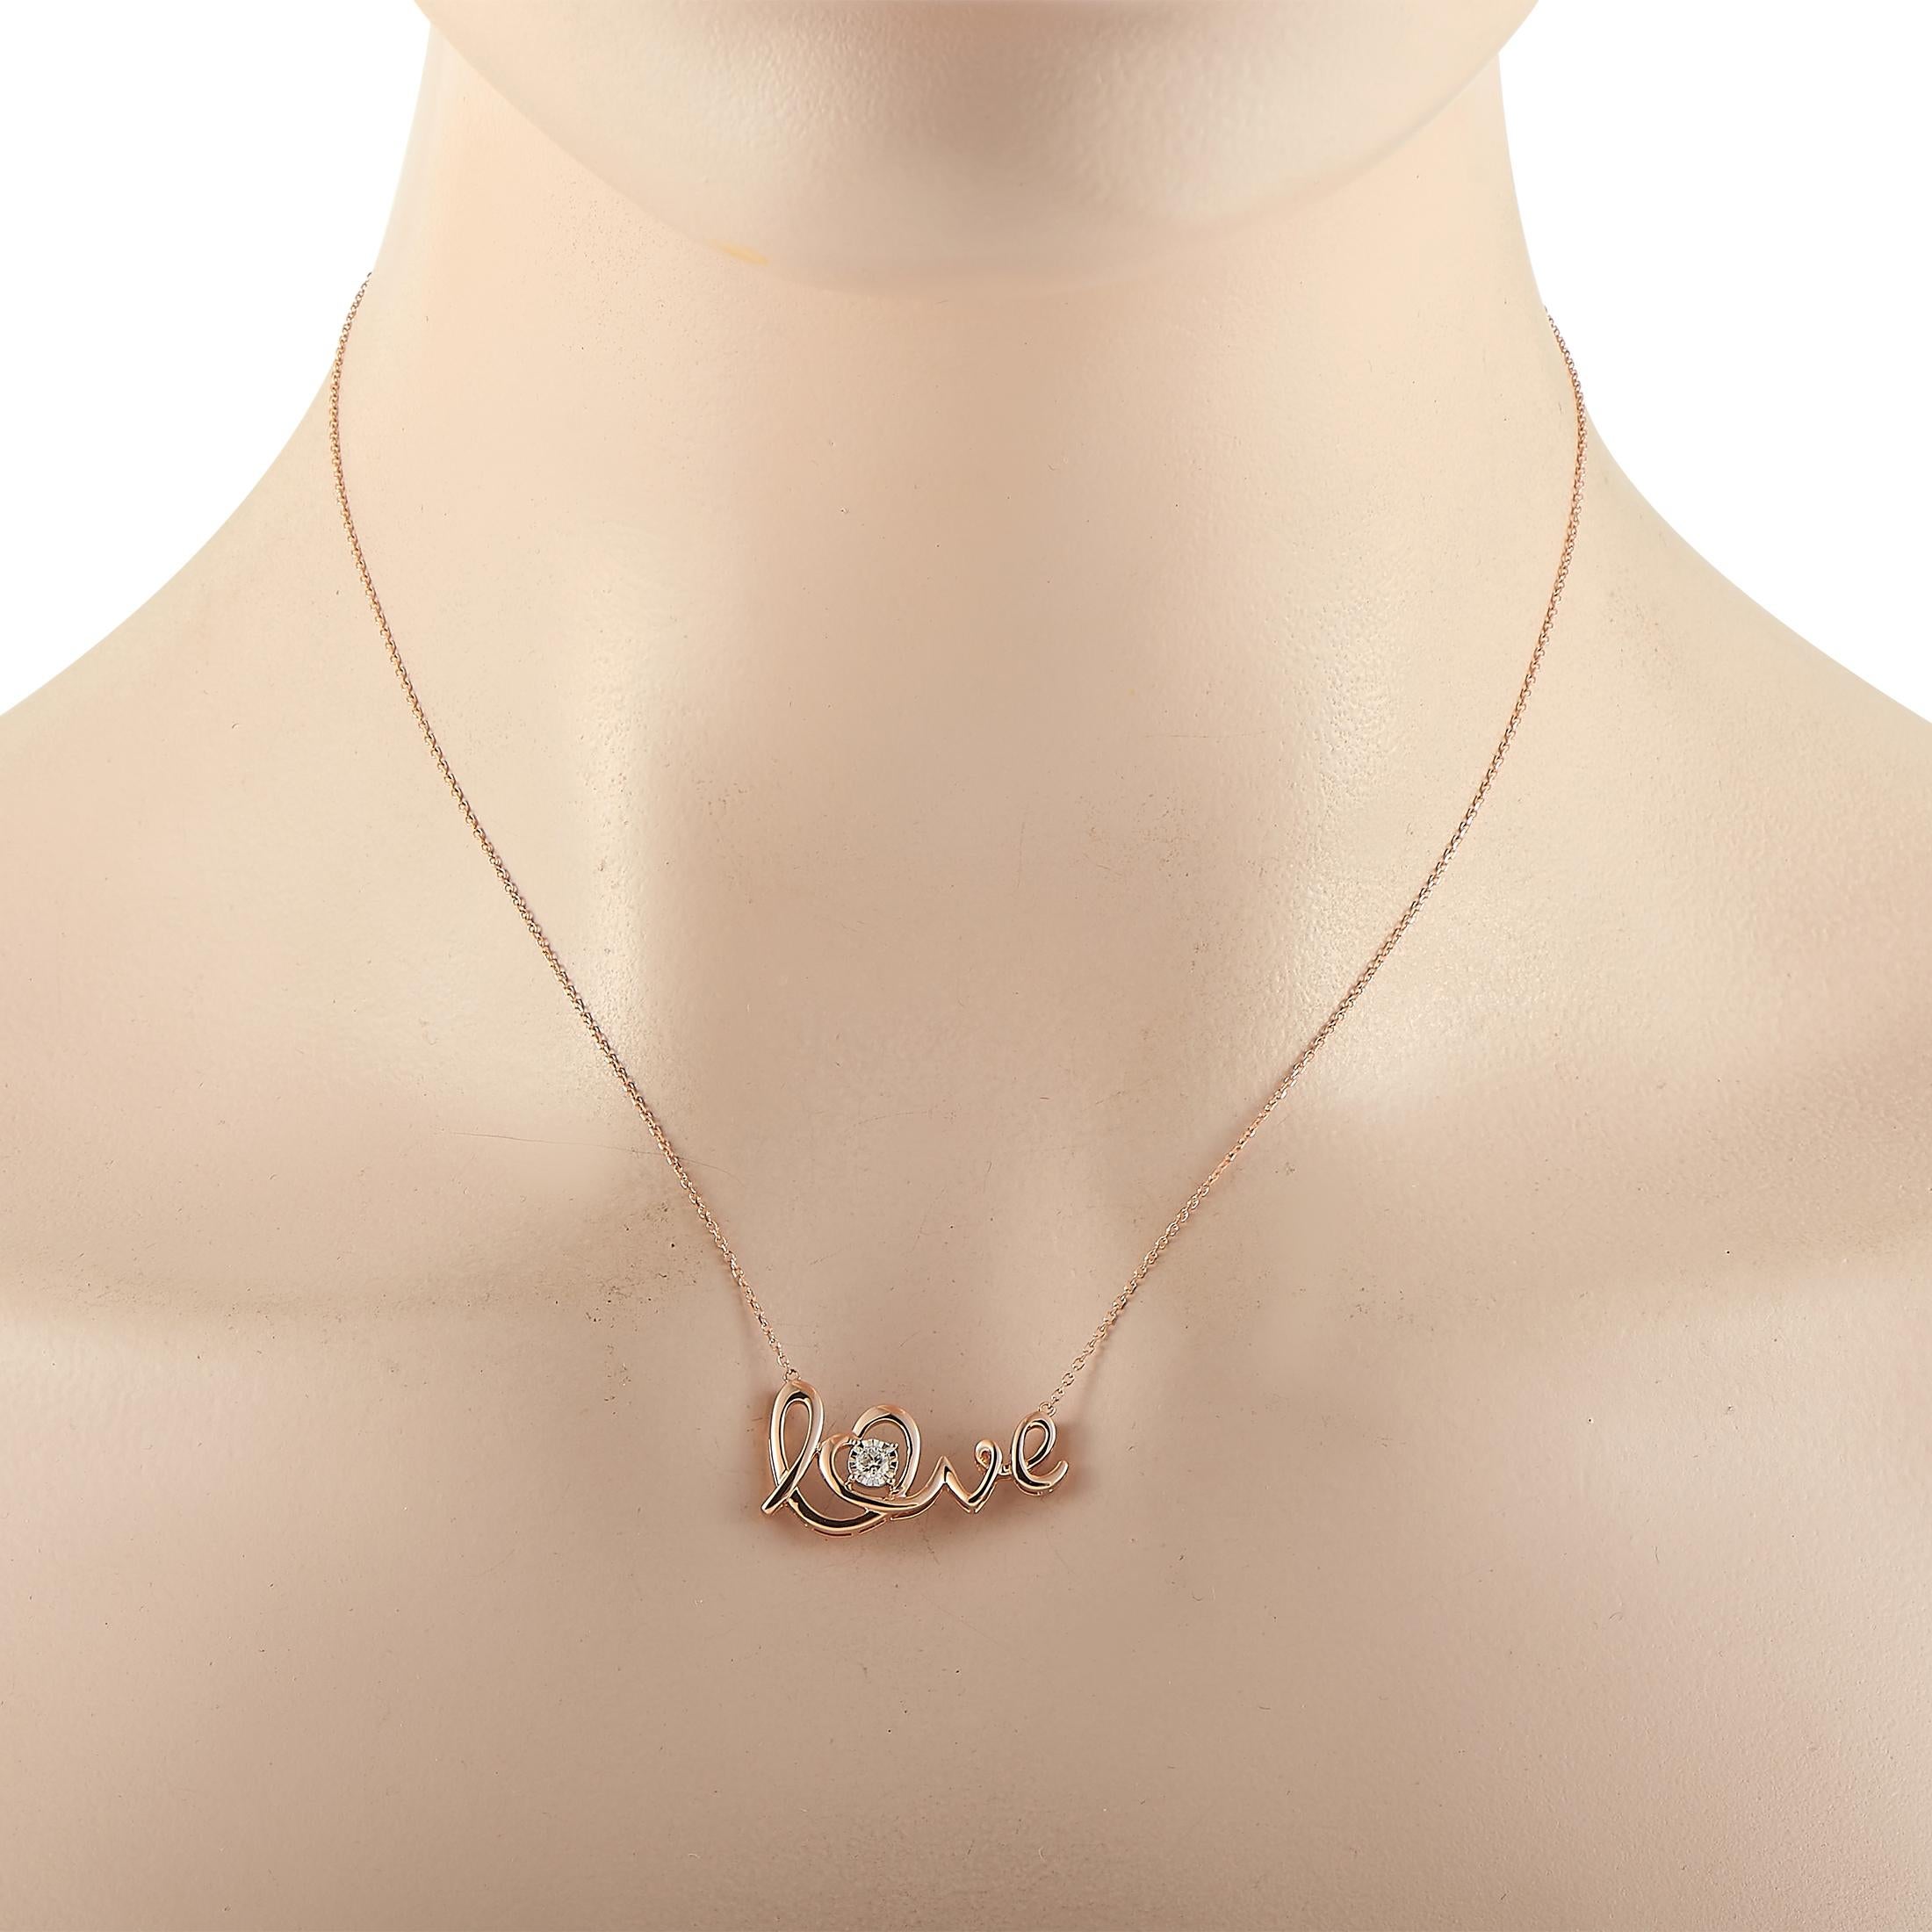 This LB Exclusive necklace is made of 14K rose gold and embellished with a 0.10 ct diamond stone. The necklace weighs 3.2 grams and boasts a 16” chain and a “love” pendant that measures 0.75” in length and 1.15” in width.
 
 Offered in brand new